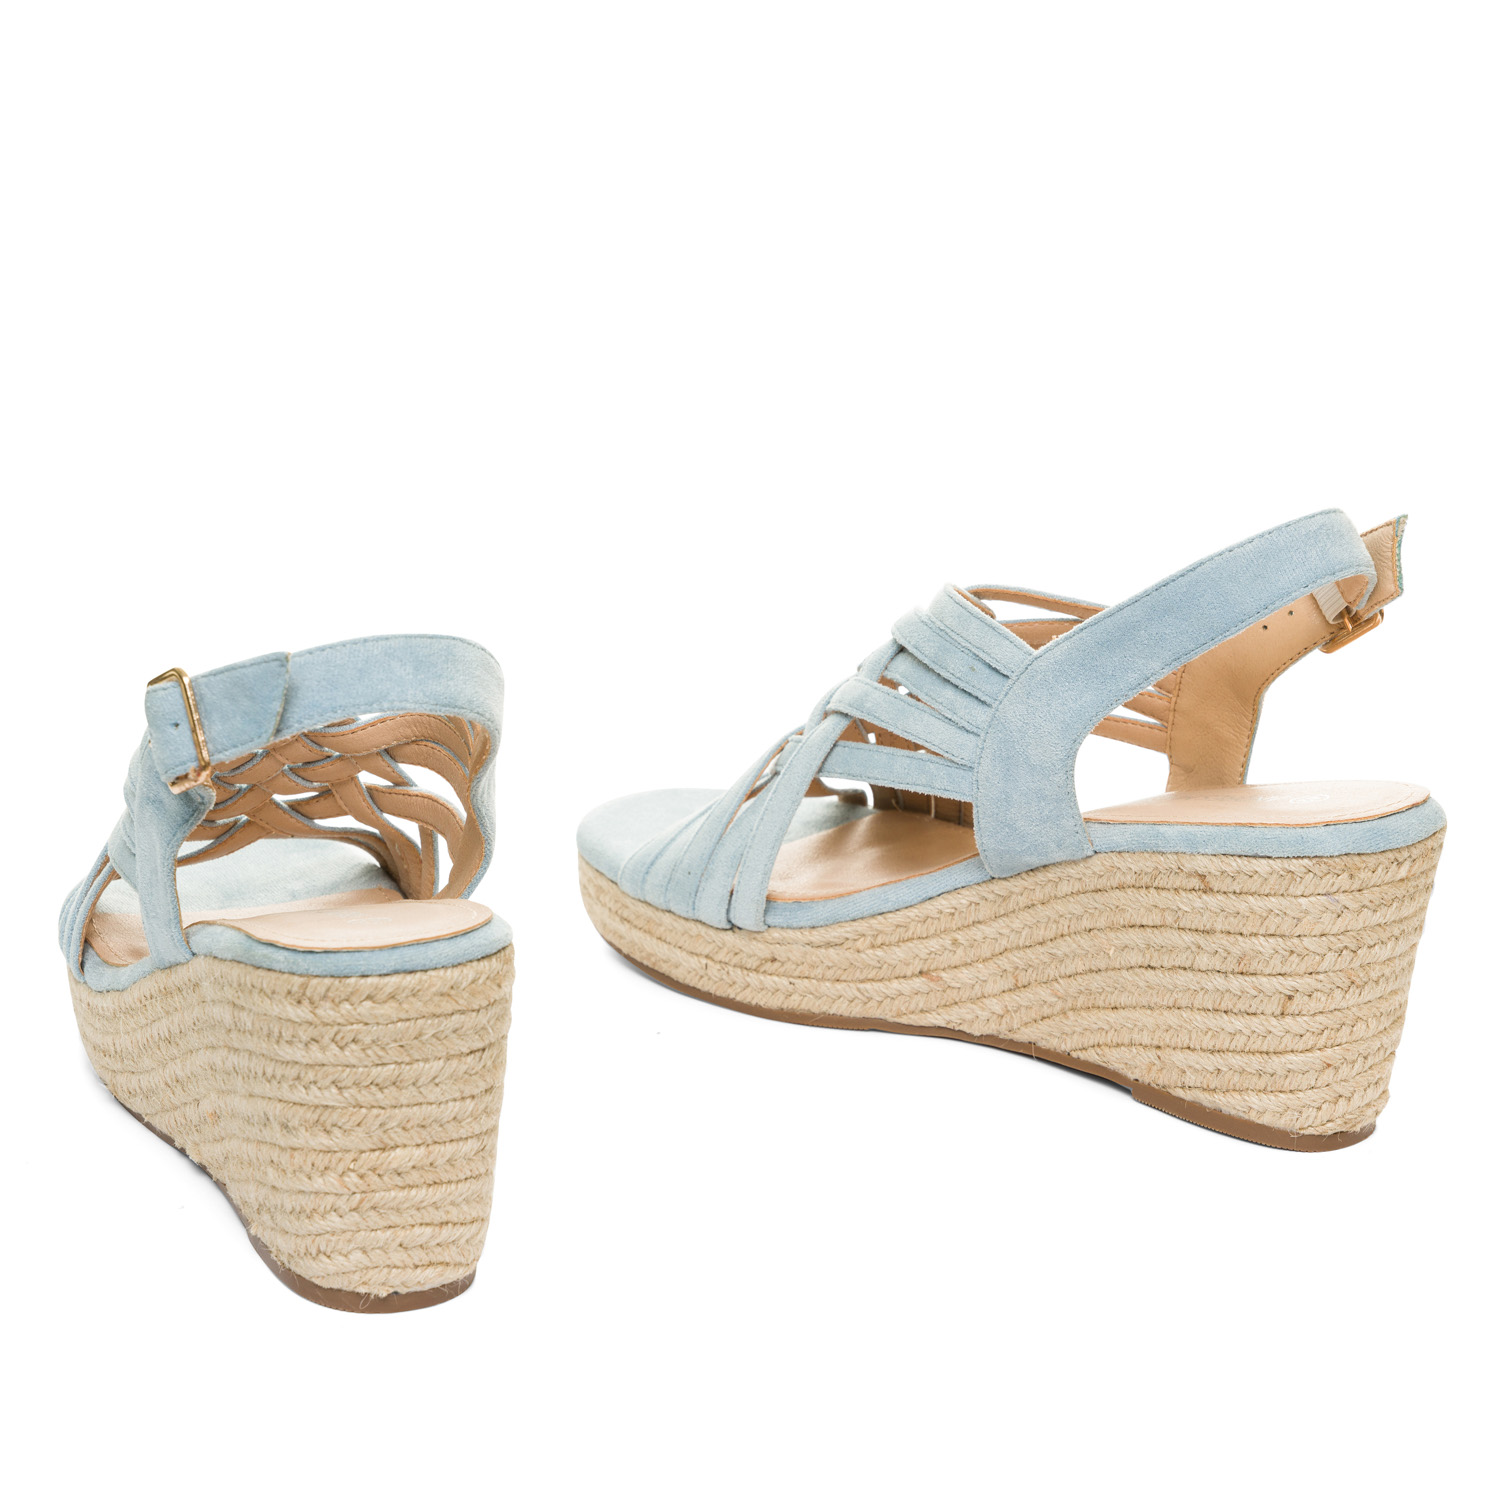 Light blue faux suede espadrilles with jute wedge 